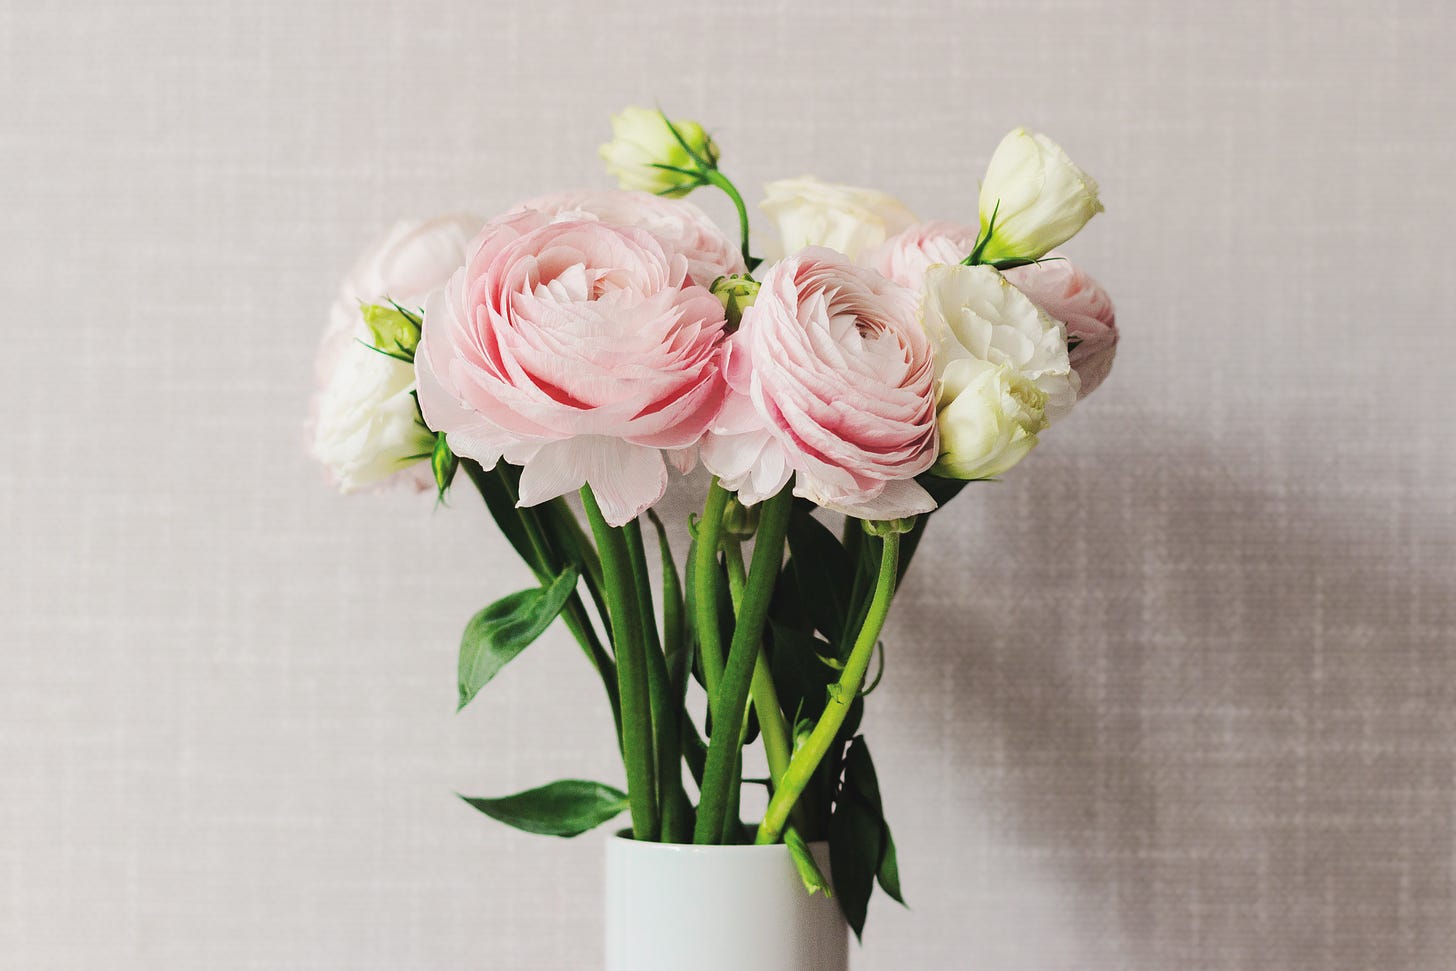 A lovely photo of pale pink and ivory roses that are beautiful, but no substitute for paid leave.